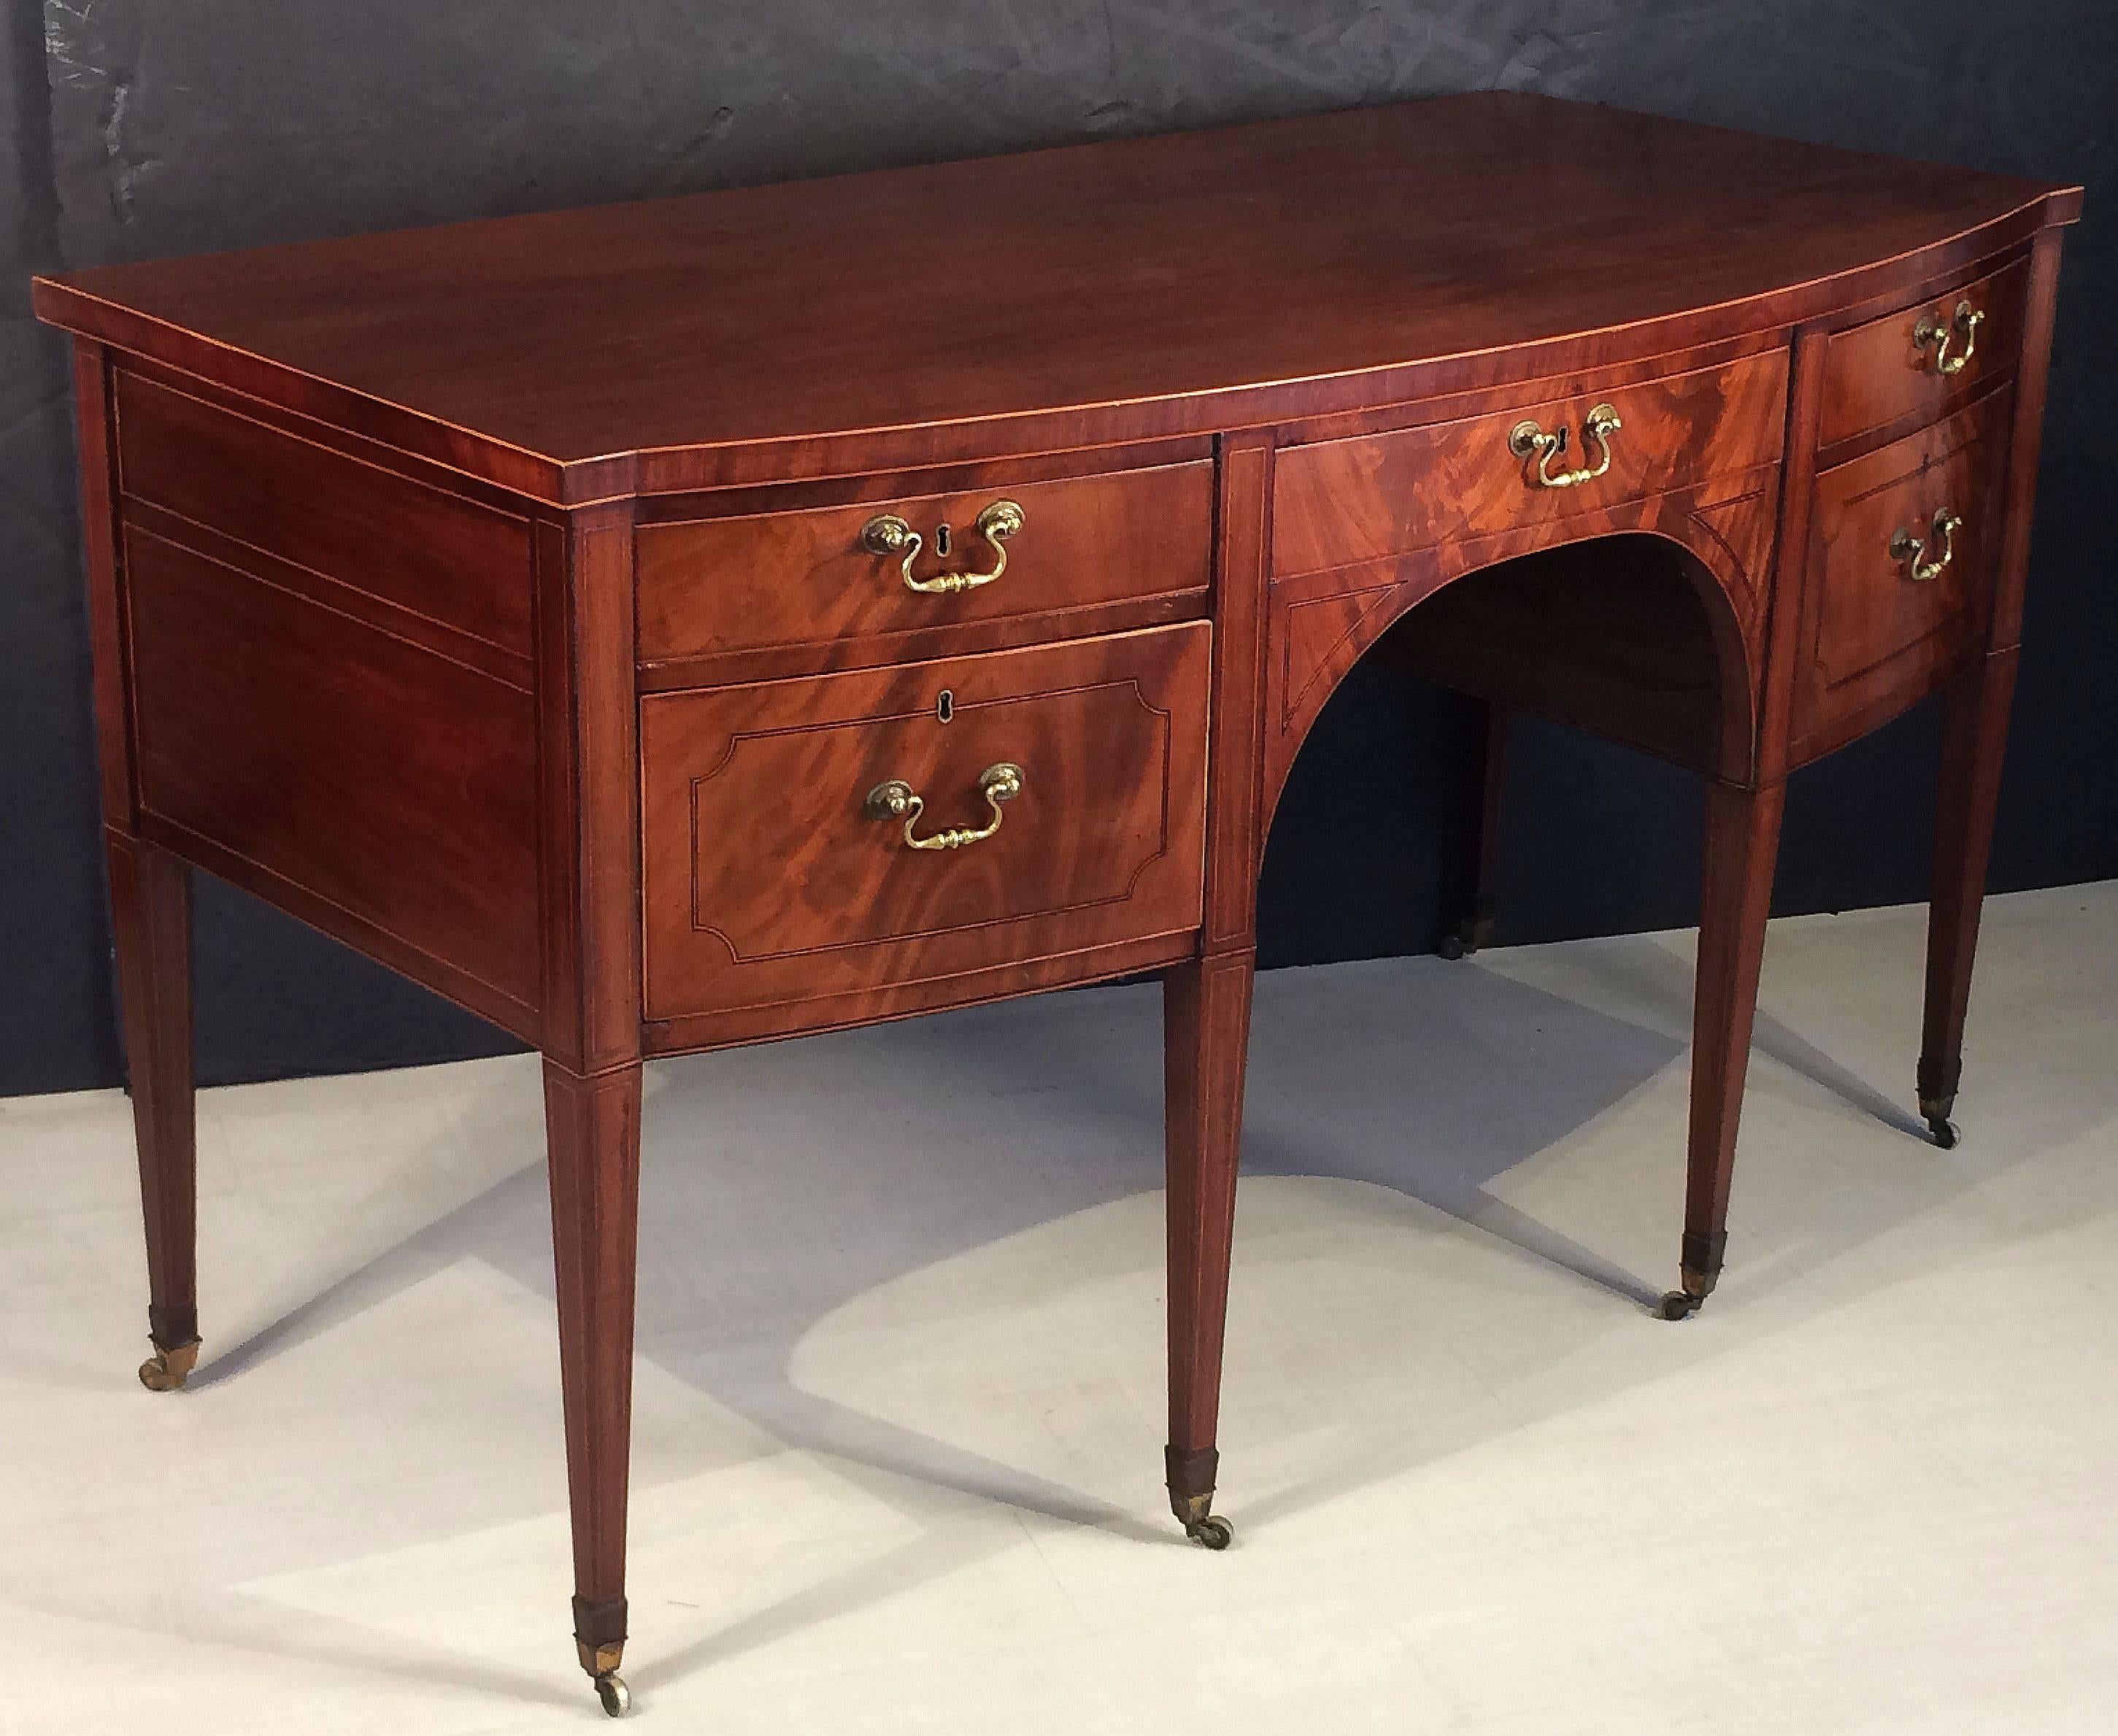 A handsome English sideboard server (or serving console) from the Regency period, featuring a bowed moulded top, over an inlaid flame mahogany frieze with two left-facing cabinet drawers, bowed middle large drawer, and two right-facing cabinet